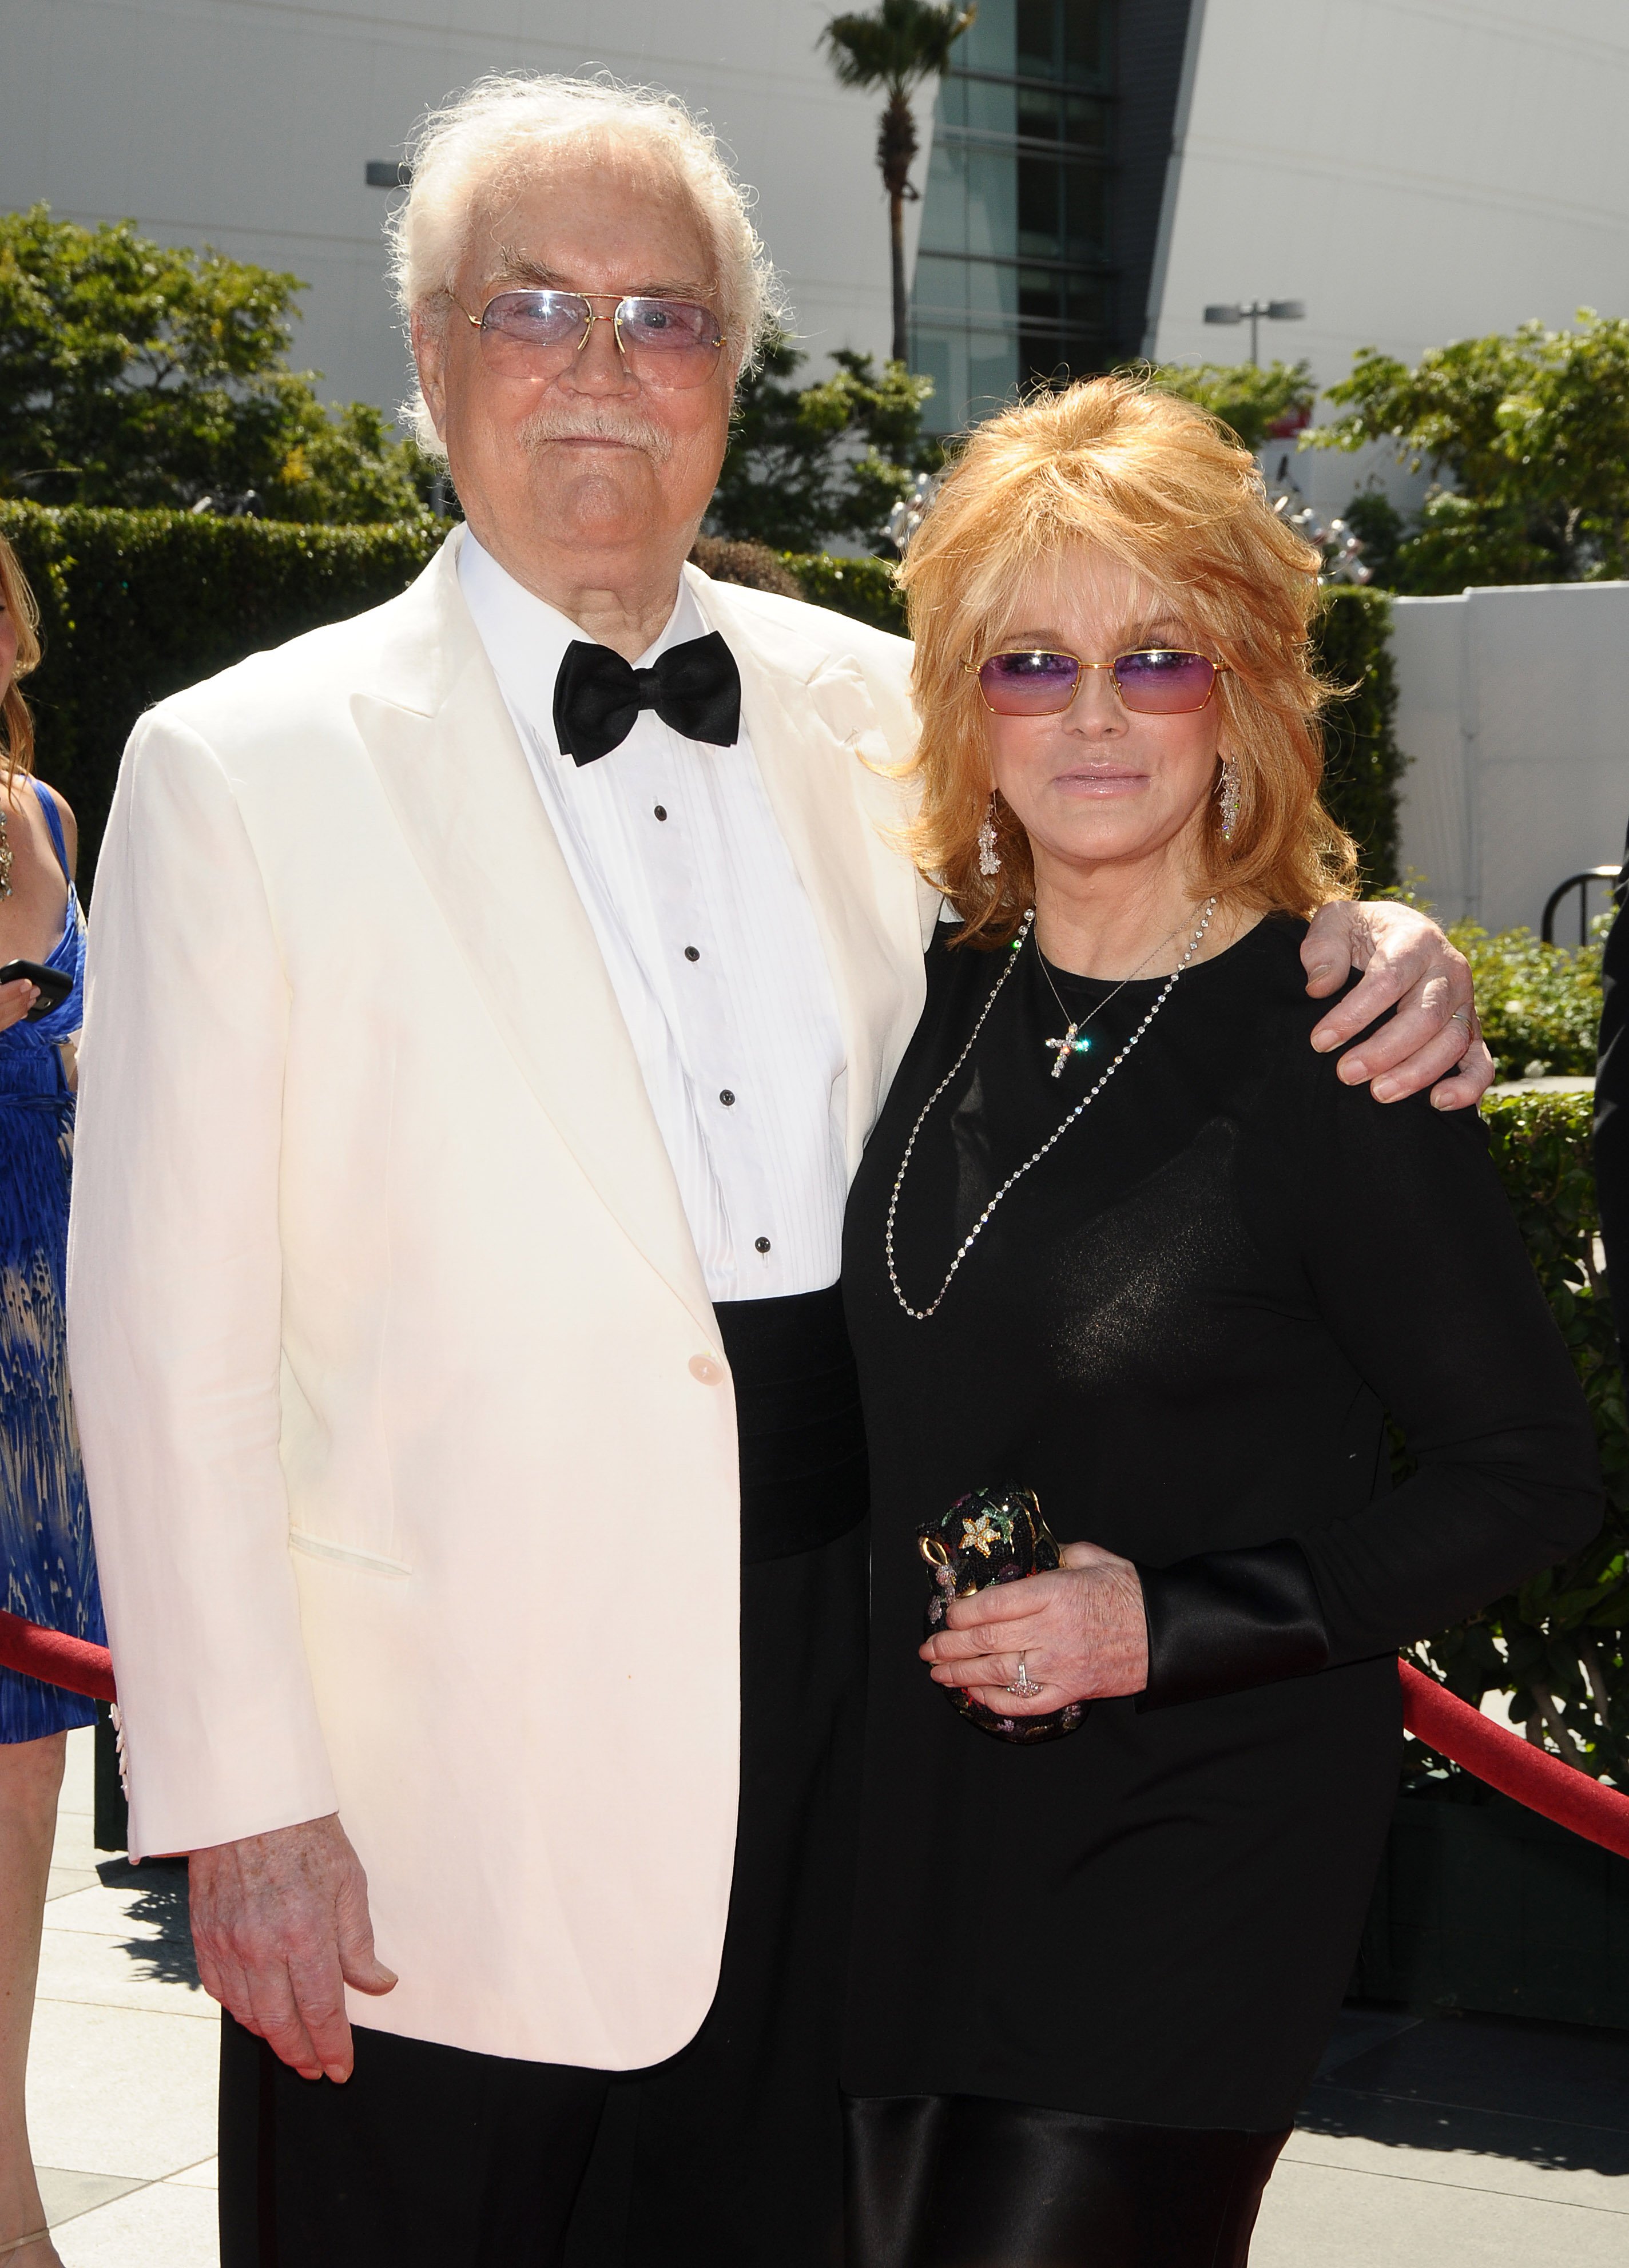 Actor Roger Smith and actress Ann-Margret attend the 2010 Creative Arts Emmy Awards at Nokia Plaza L.A. LIVE on August 21, 2010 in Los Angeles, California. | Source: Getty Images